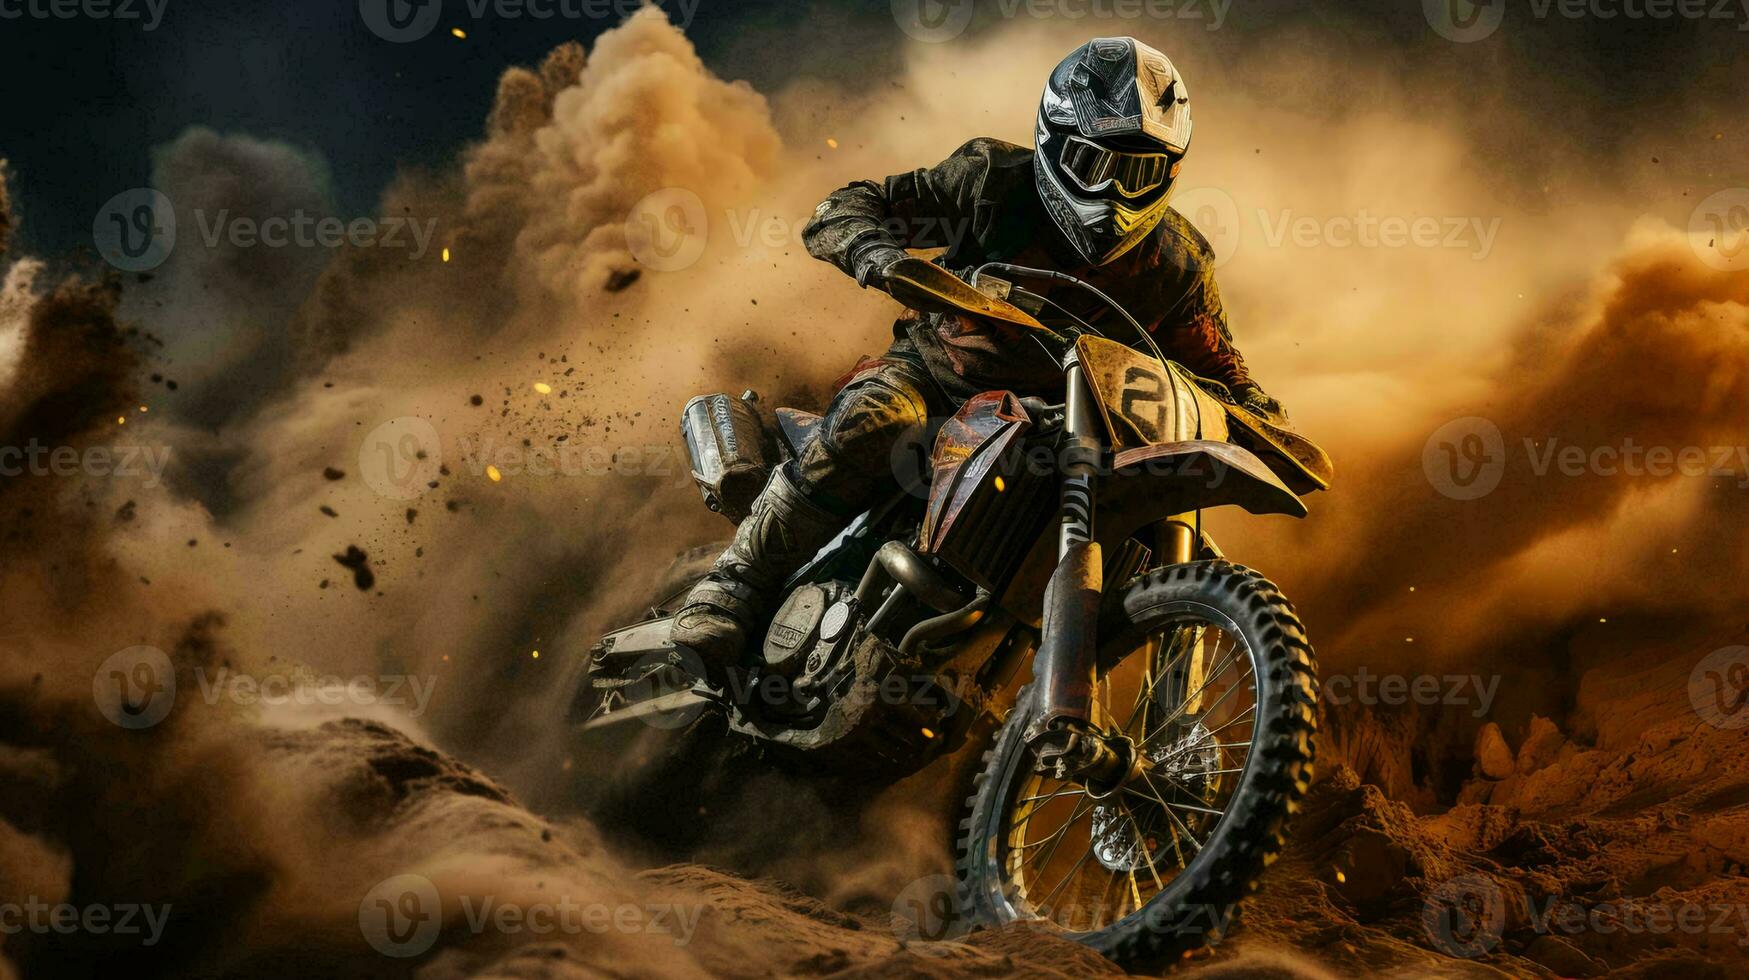 A motorcyclist on a motorcycle quickly rides through the dirt and dust on the track during a motocross competition photo